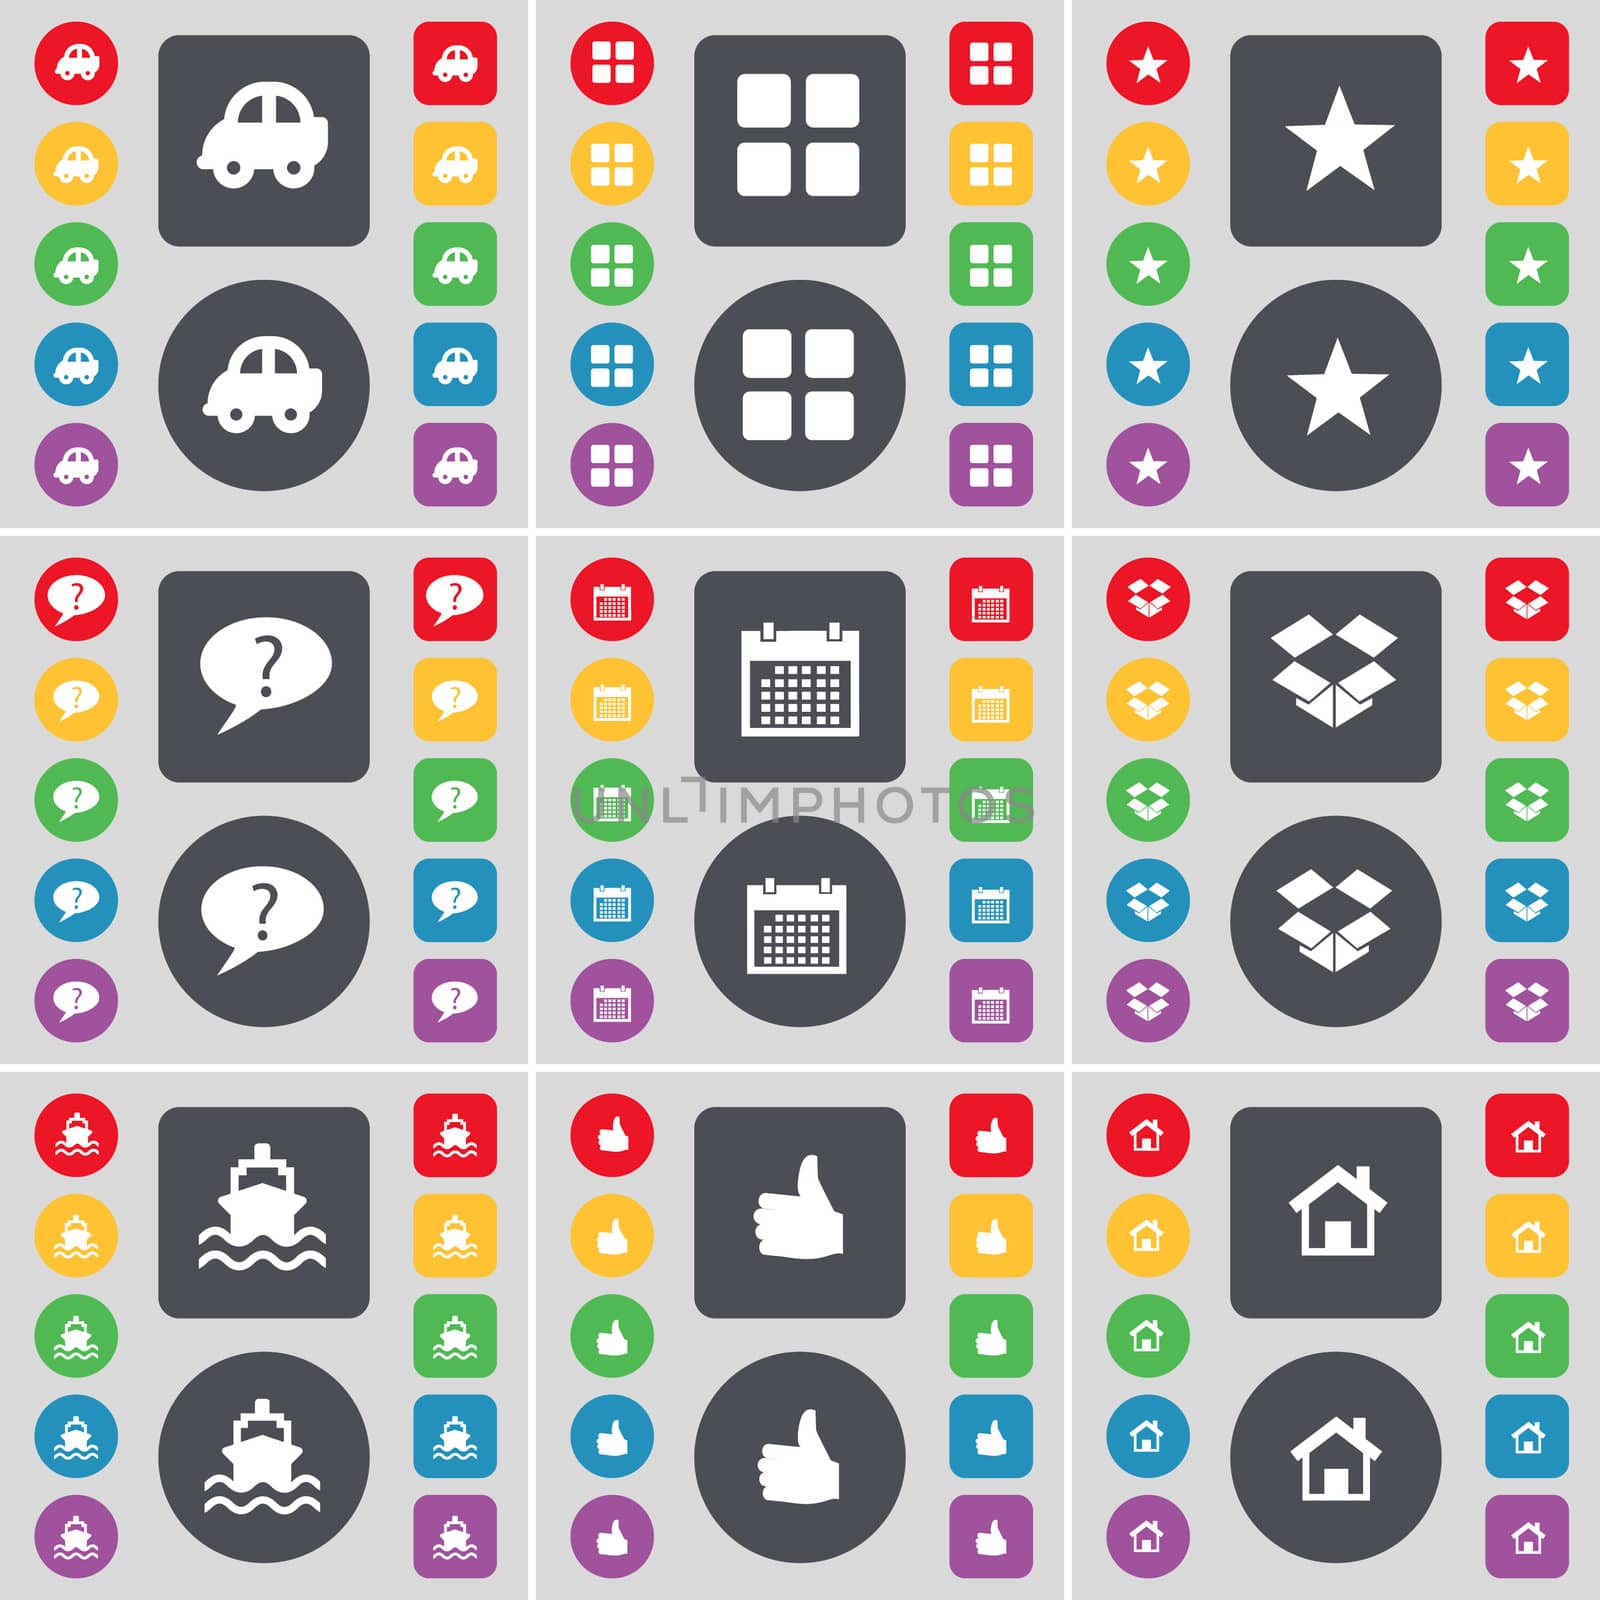 Car, Apps, Star, Chat bubble, Calendar, Dropbox, Ship, Like, House icon symbol. A large set of flat, colored buttons for your design. illustration